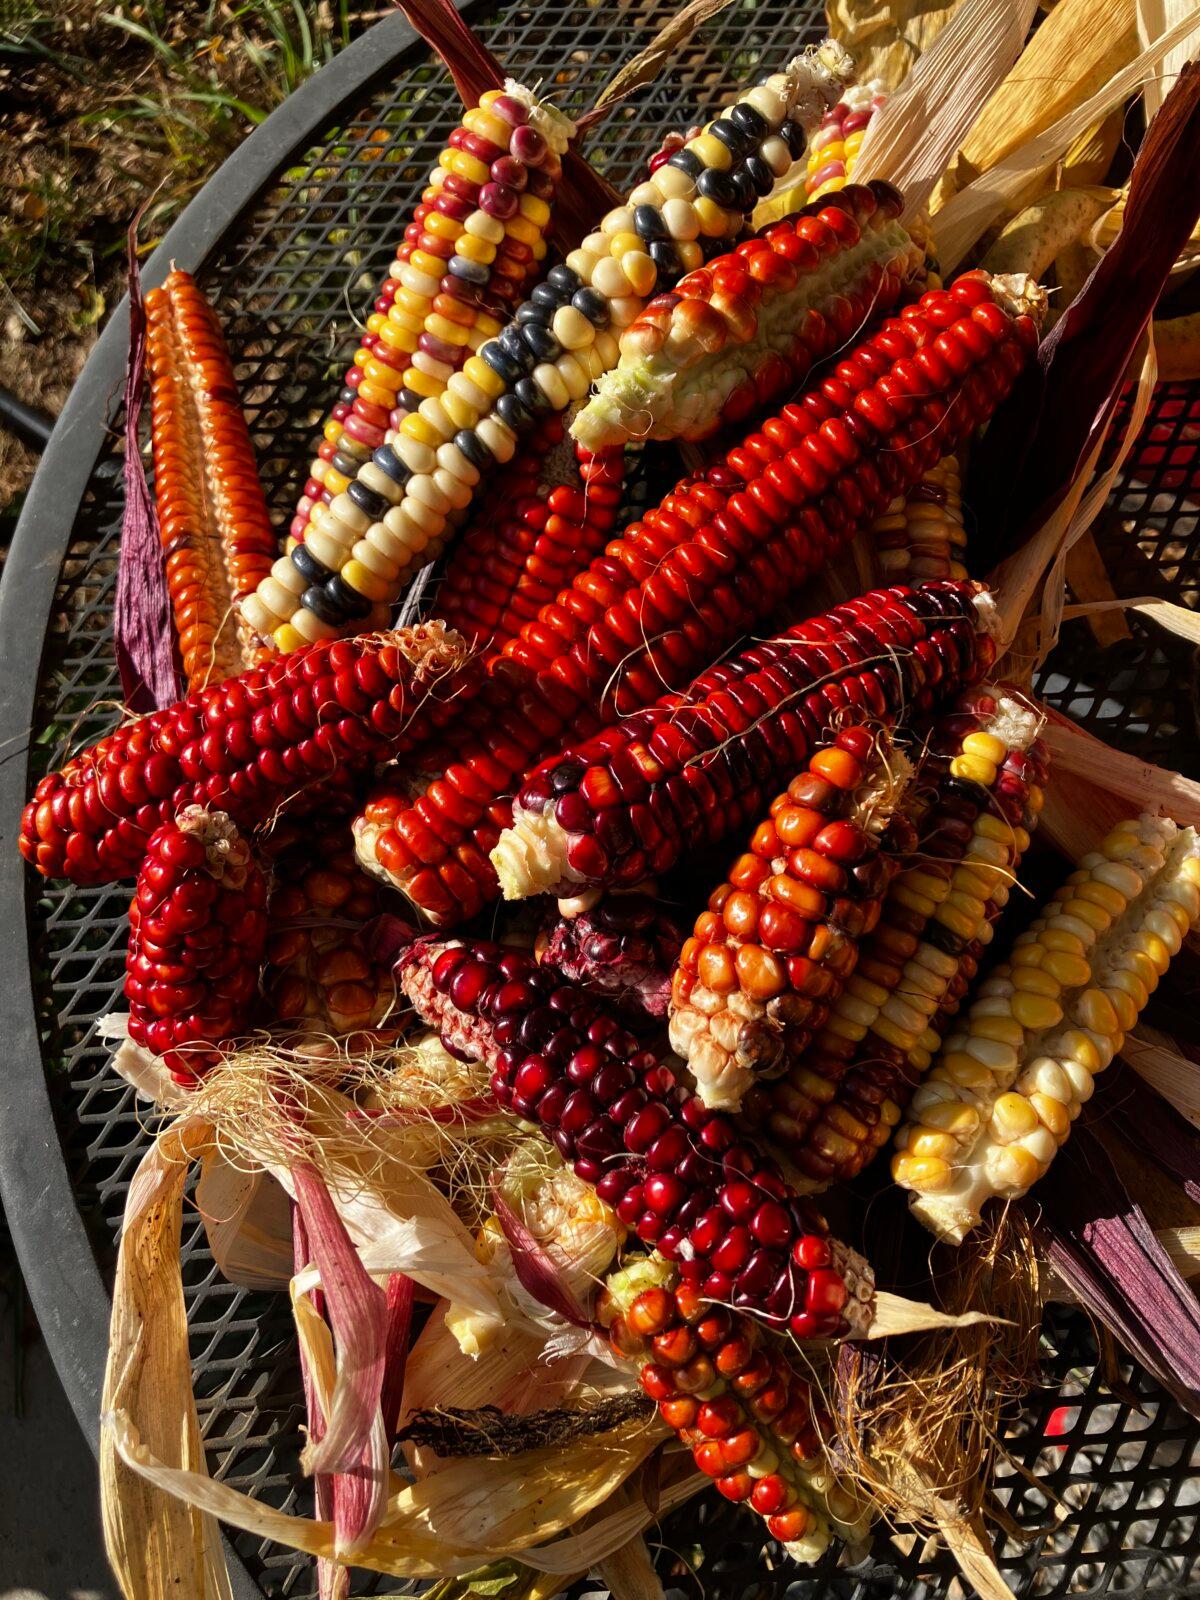 A multicolored harvest from the author's farm—when only red corn seeds were planted. (Eric Lucas)